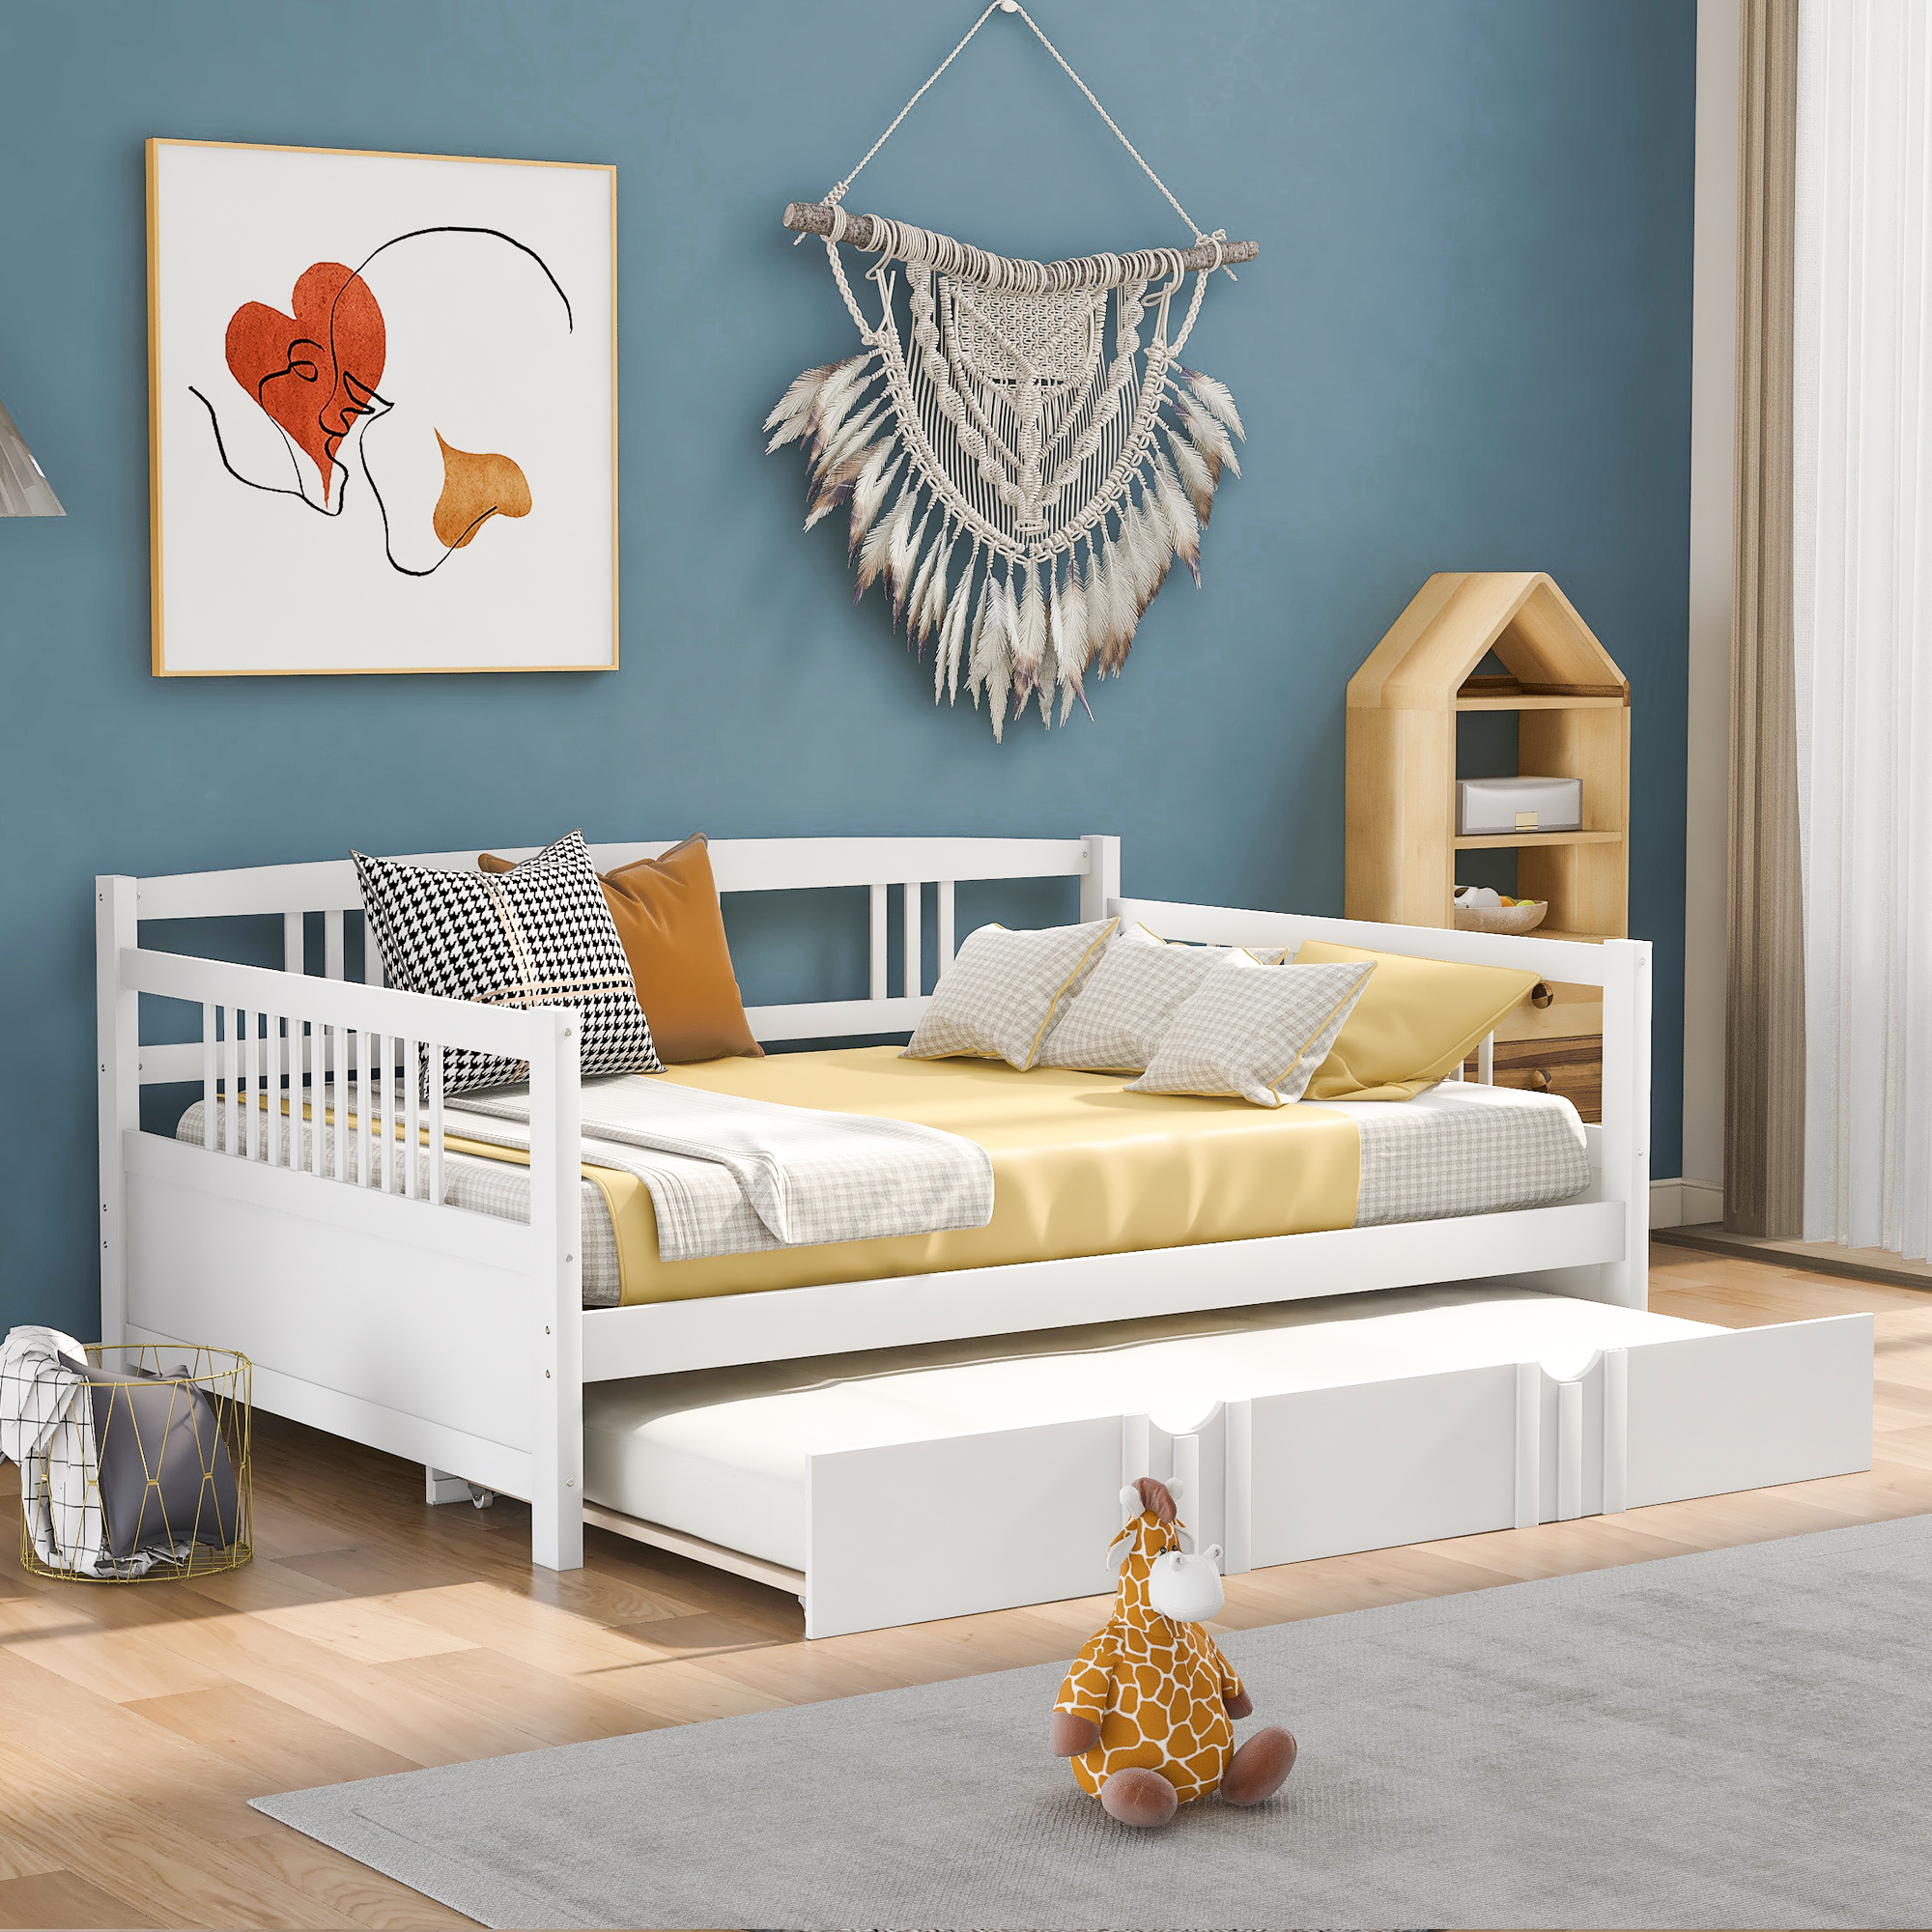 PAPROOS Daybed with Trundle Included, Full Size Daybed Bed Frame with Pull Out Trundle Bed and Wooden Slats, Solid Wood Sofa Bed Full Daybed, No Box Spring Needed, White - image 1 of 12